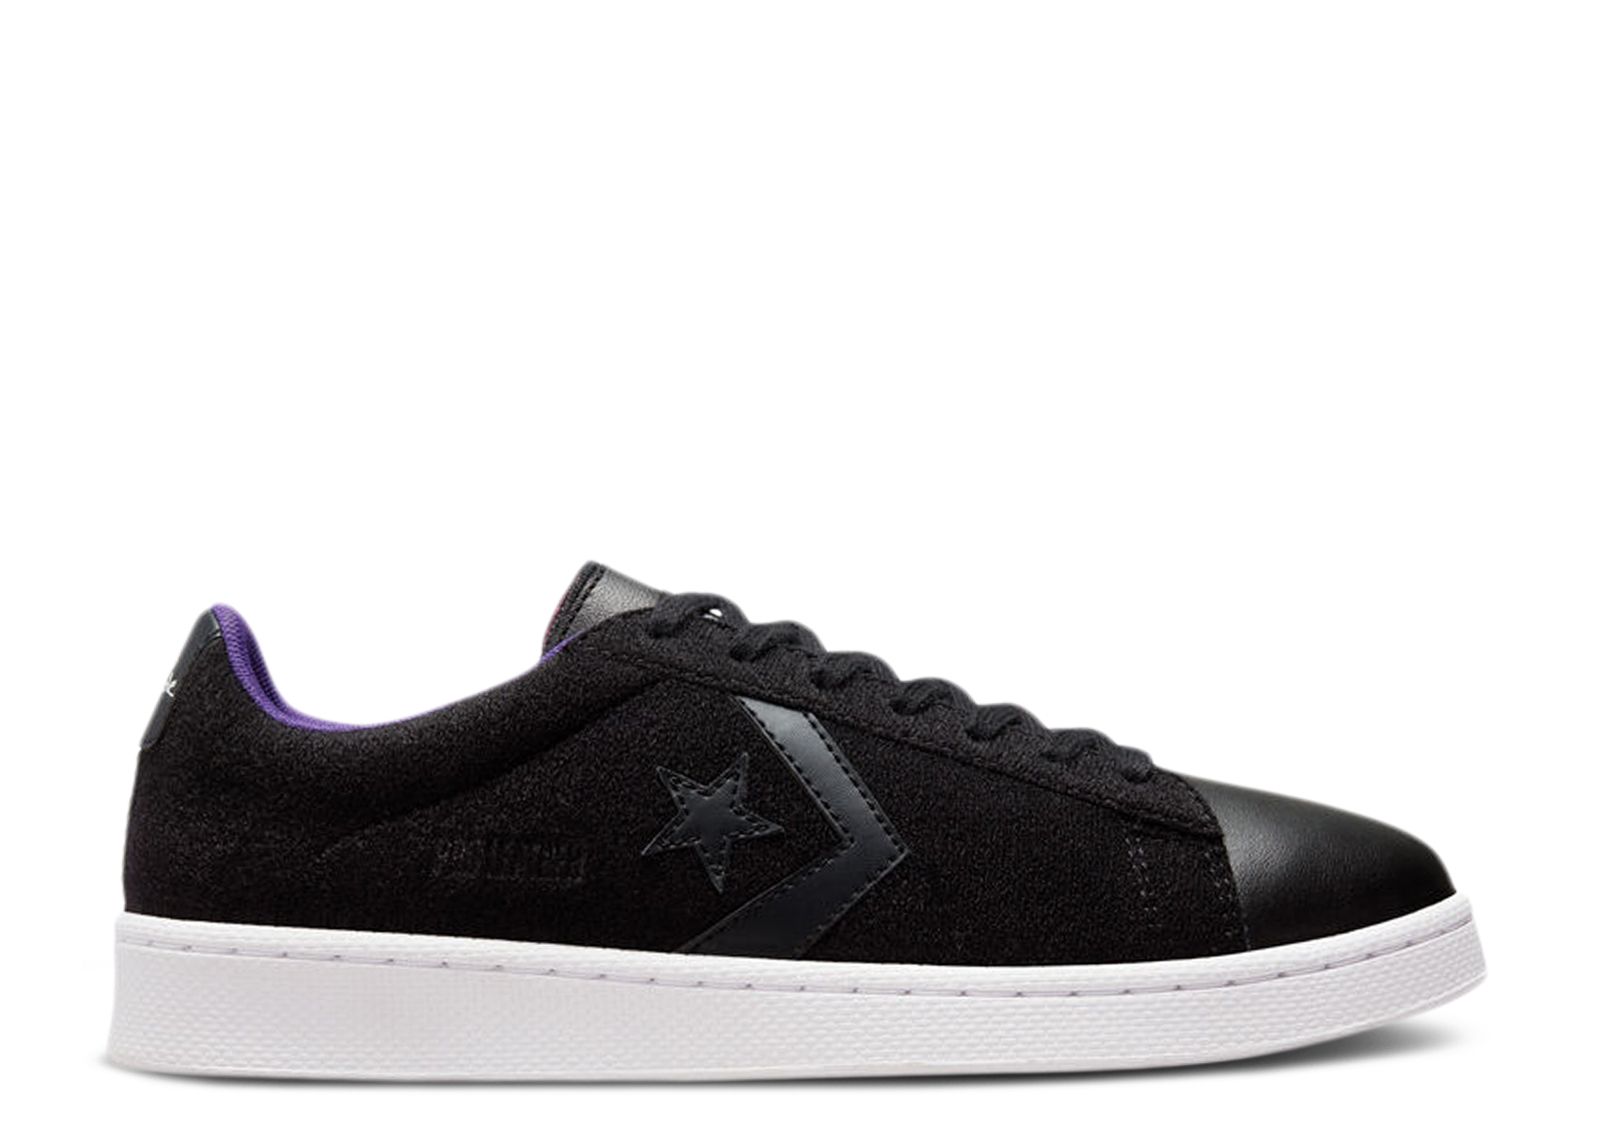 converse pro leather it s possible Кроссовки Converse Pro Leather Low 'It'S Possible', черный